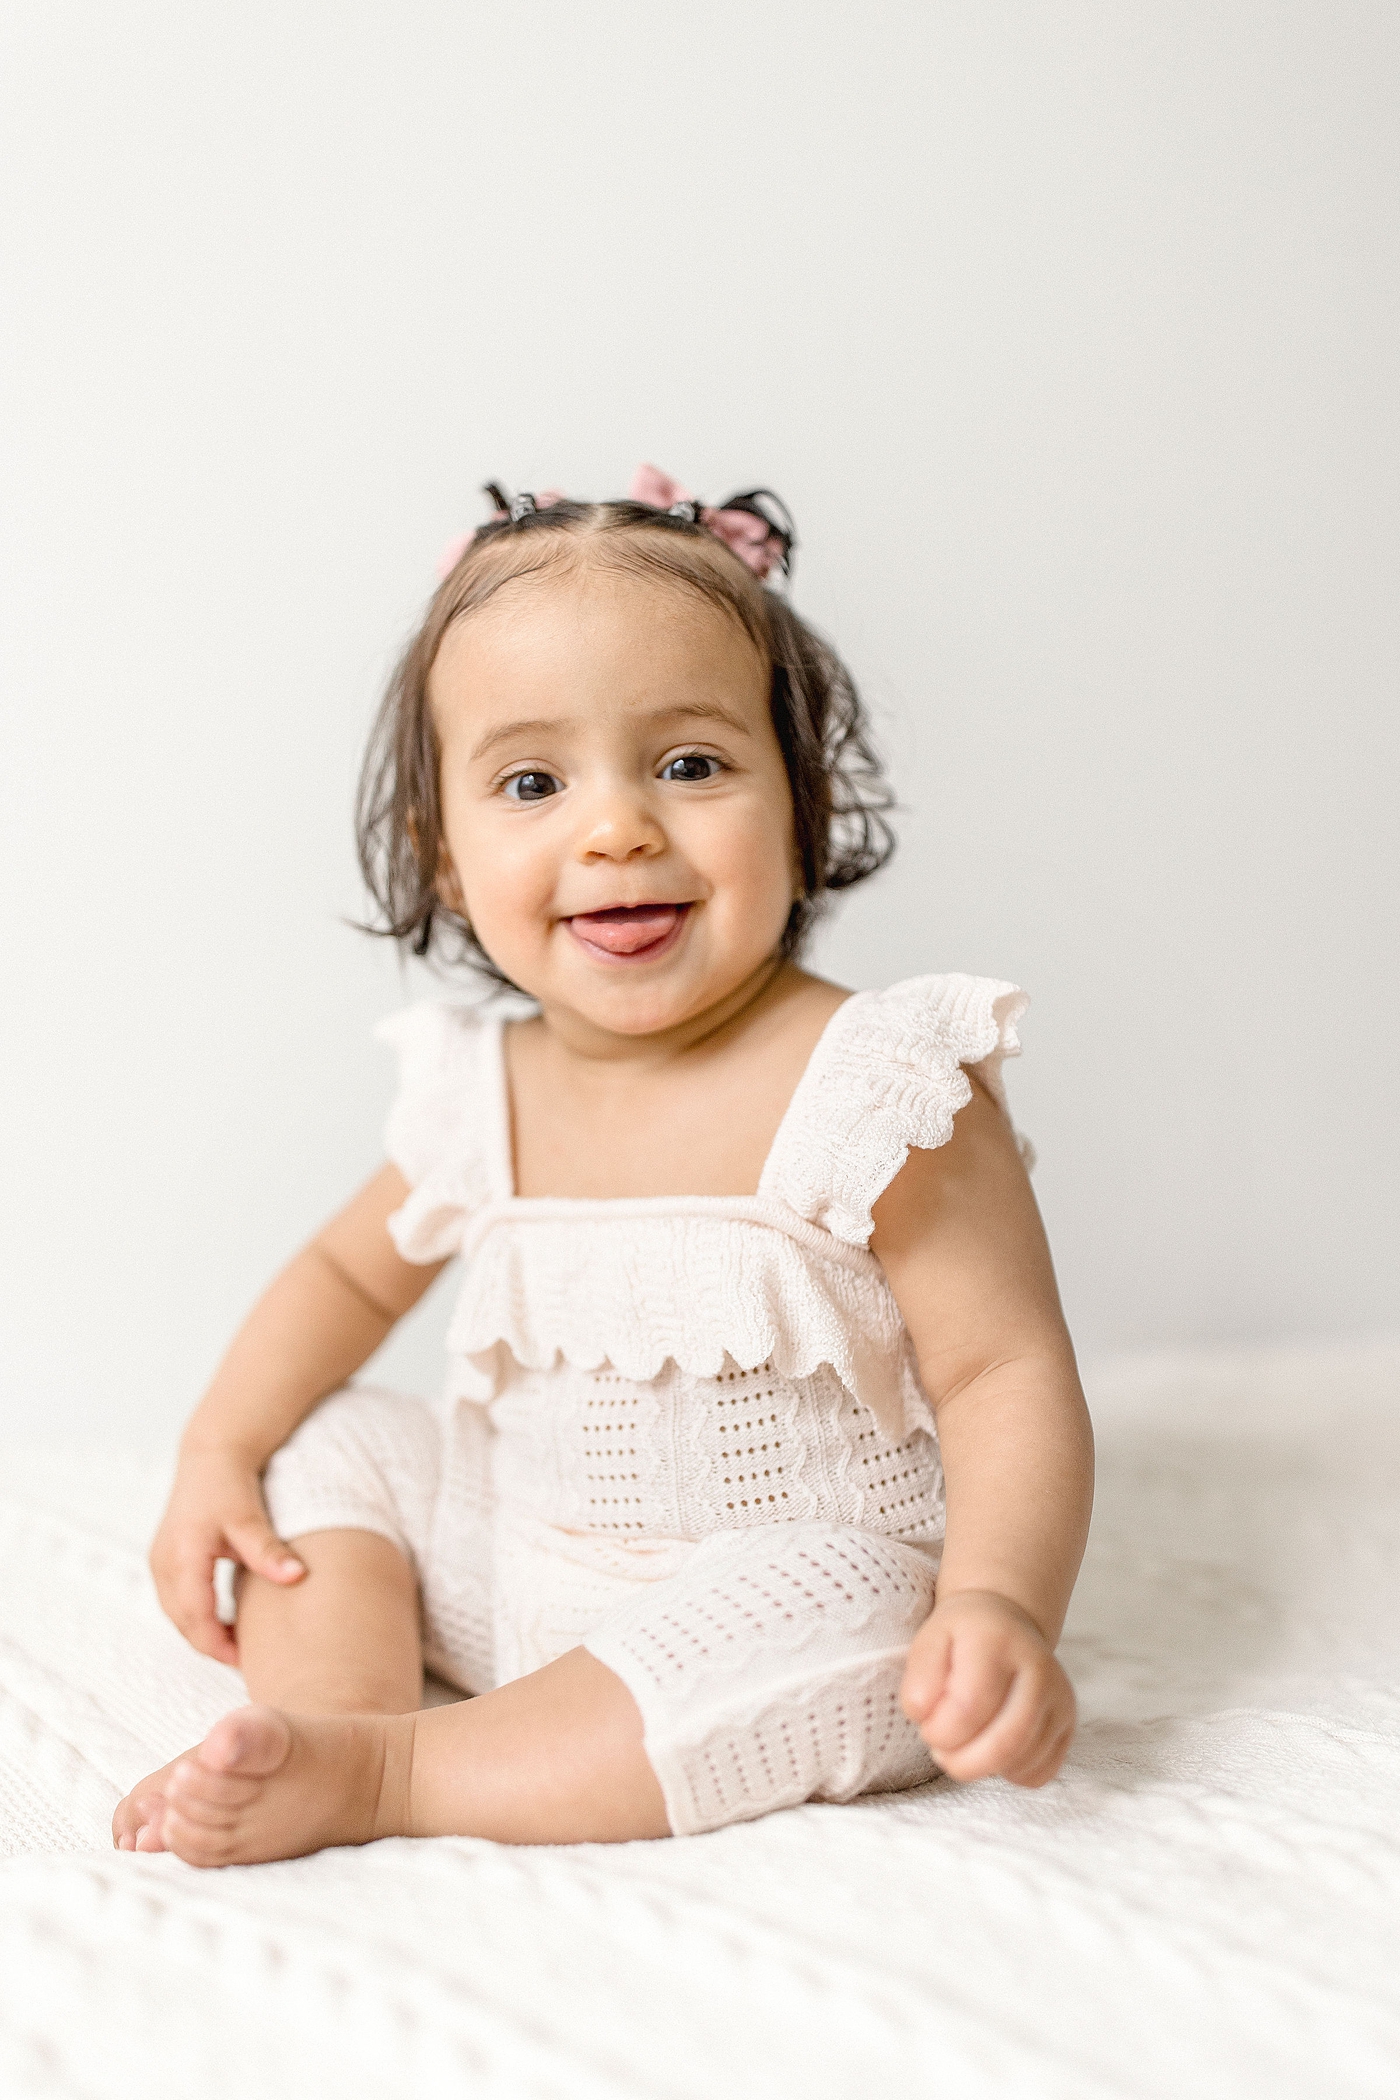 Baby girl smiles big for her portrait during her baby photography miami session. Photo by Ivanna Vidal Photography.